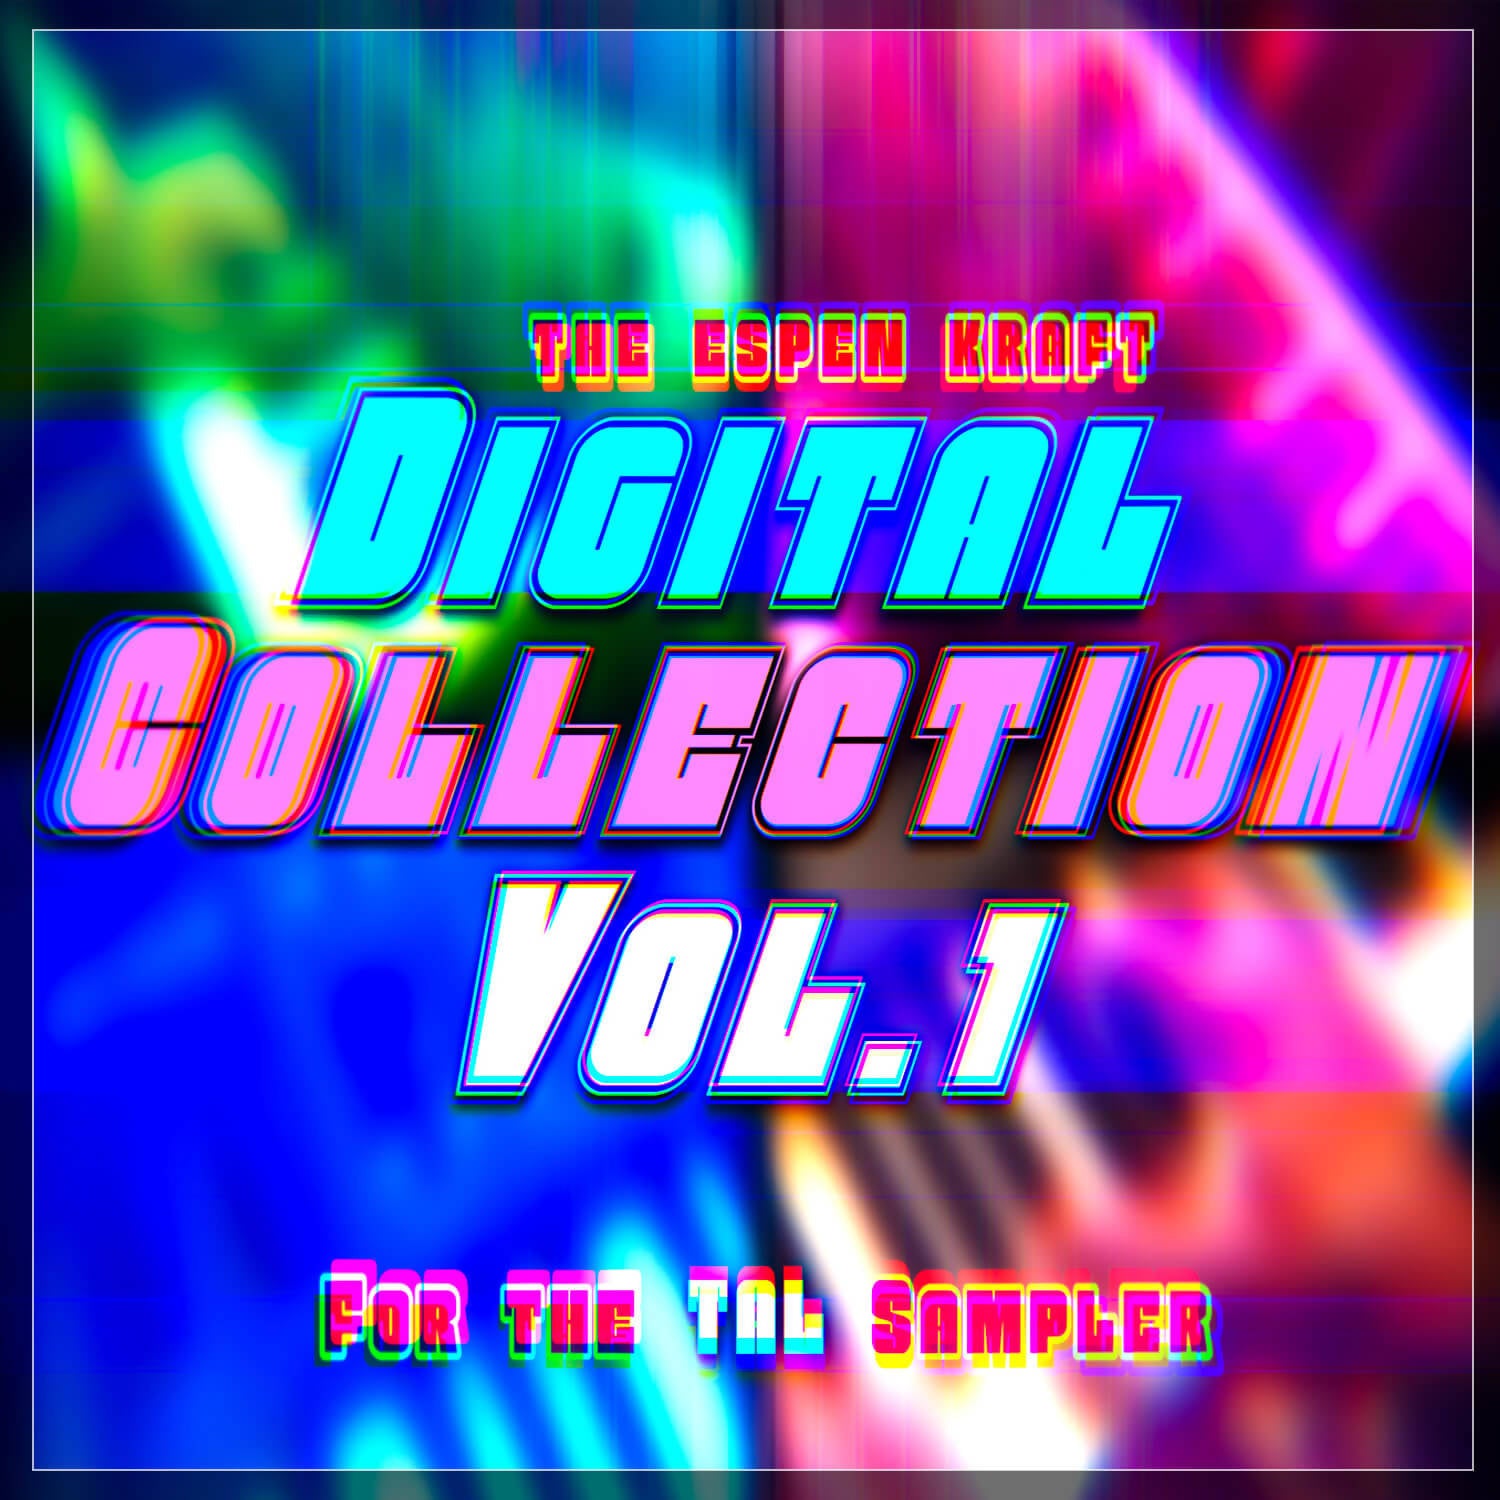 tal sampler retro sounds that reflect the golden ages of Synth-pop and 80's retro? You want the best old school synth patches from 11 different classic synths